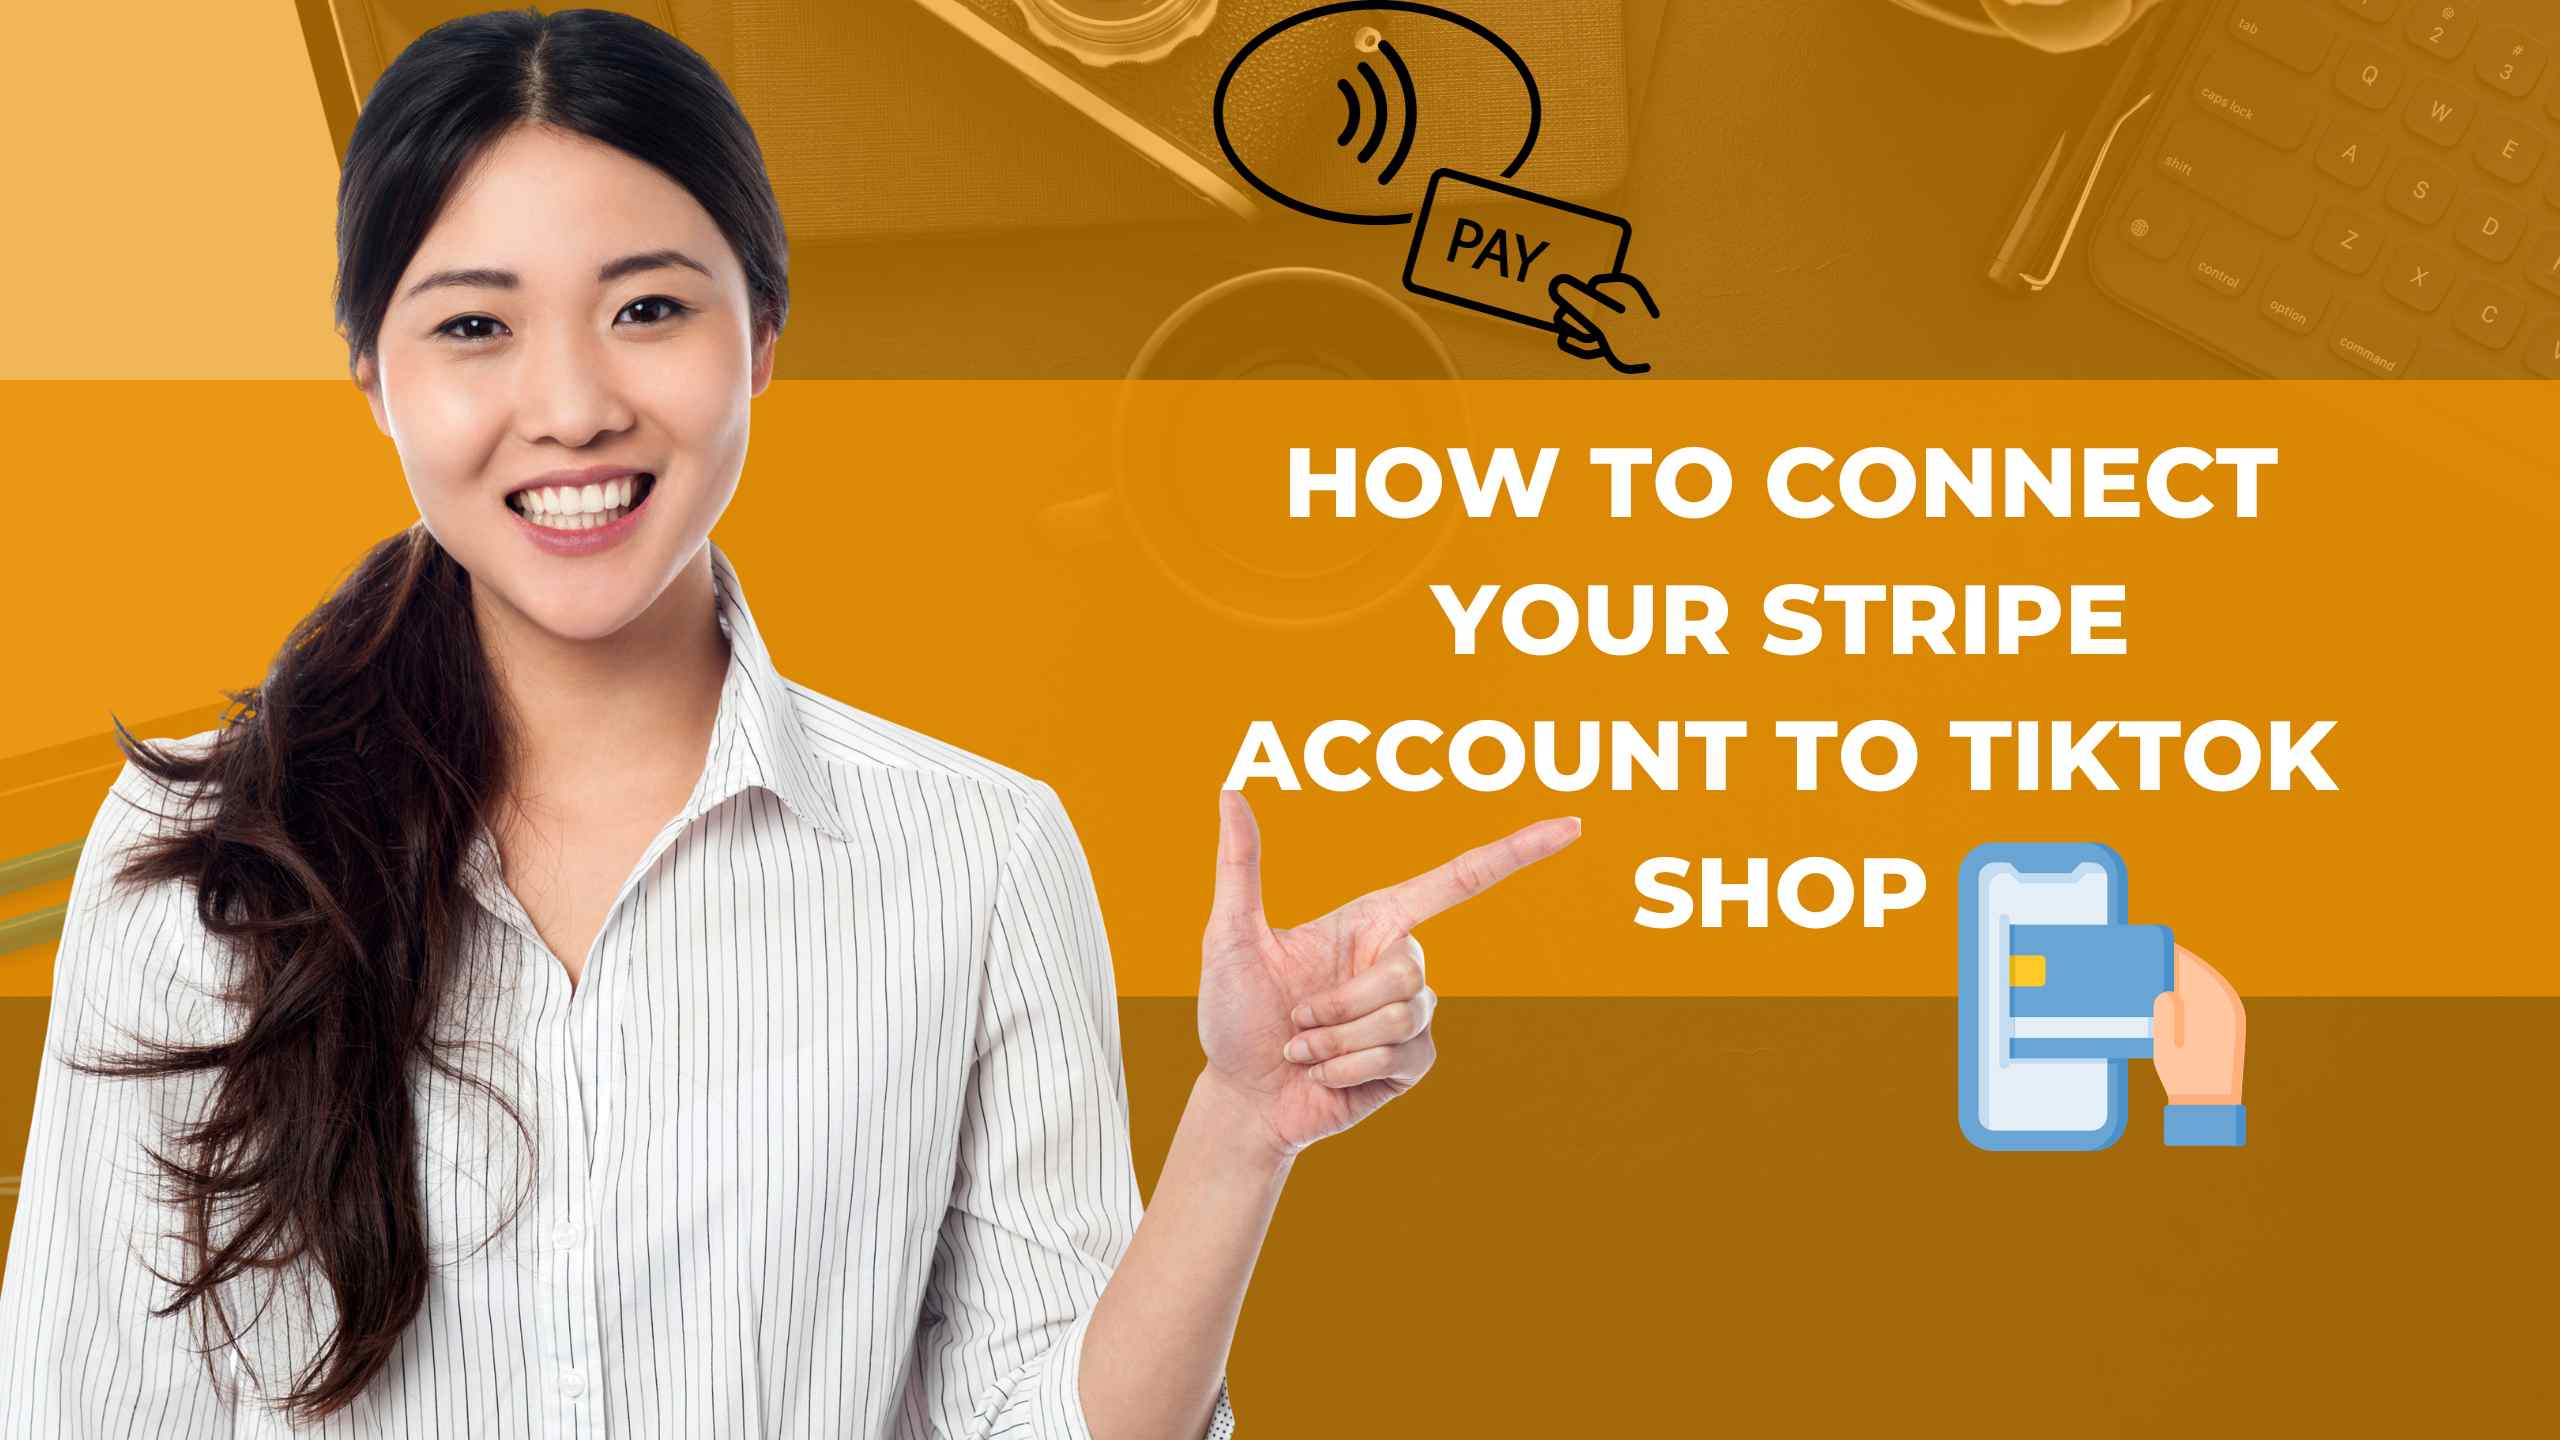 How to Connect Your Stripe Account to TikTok Shop